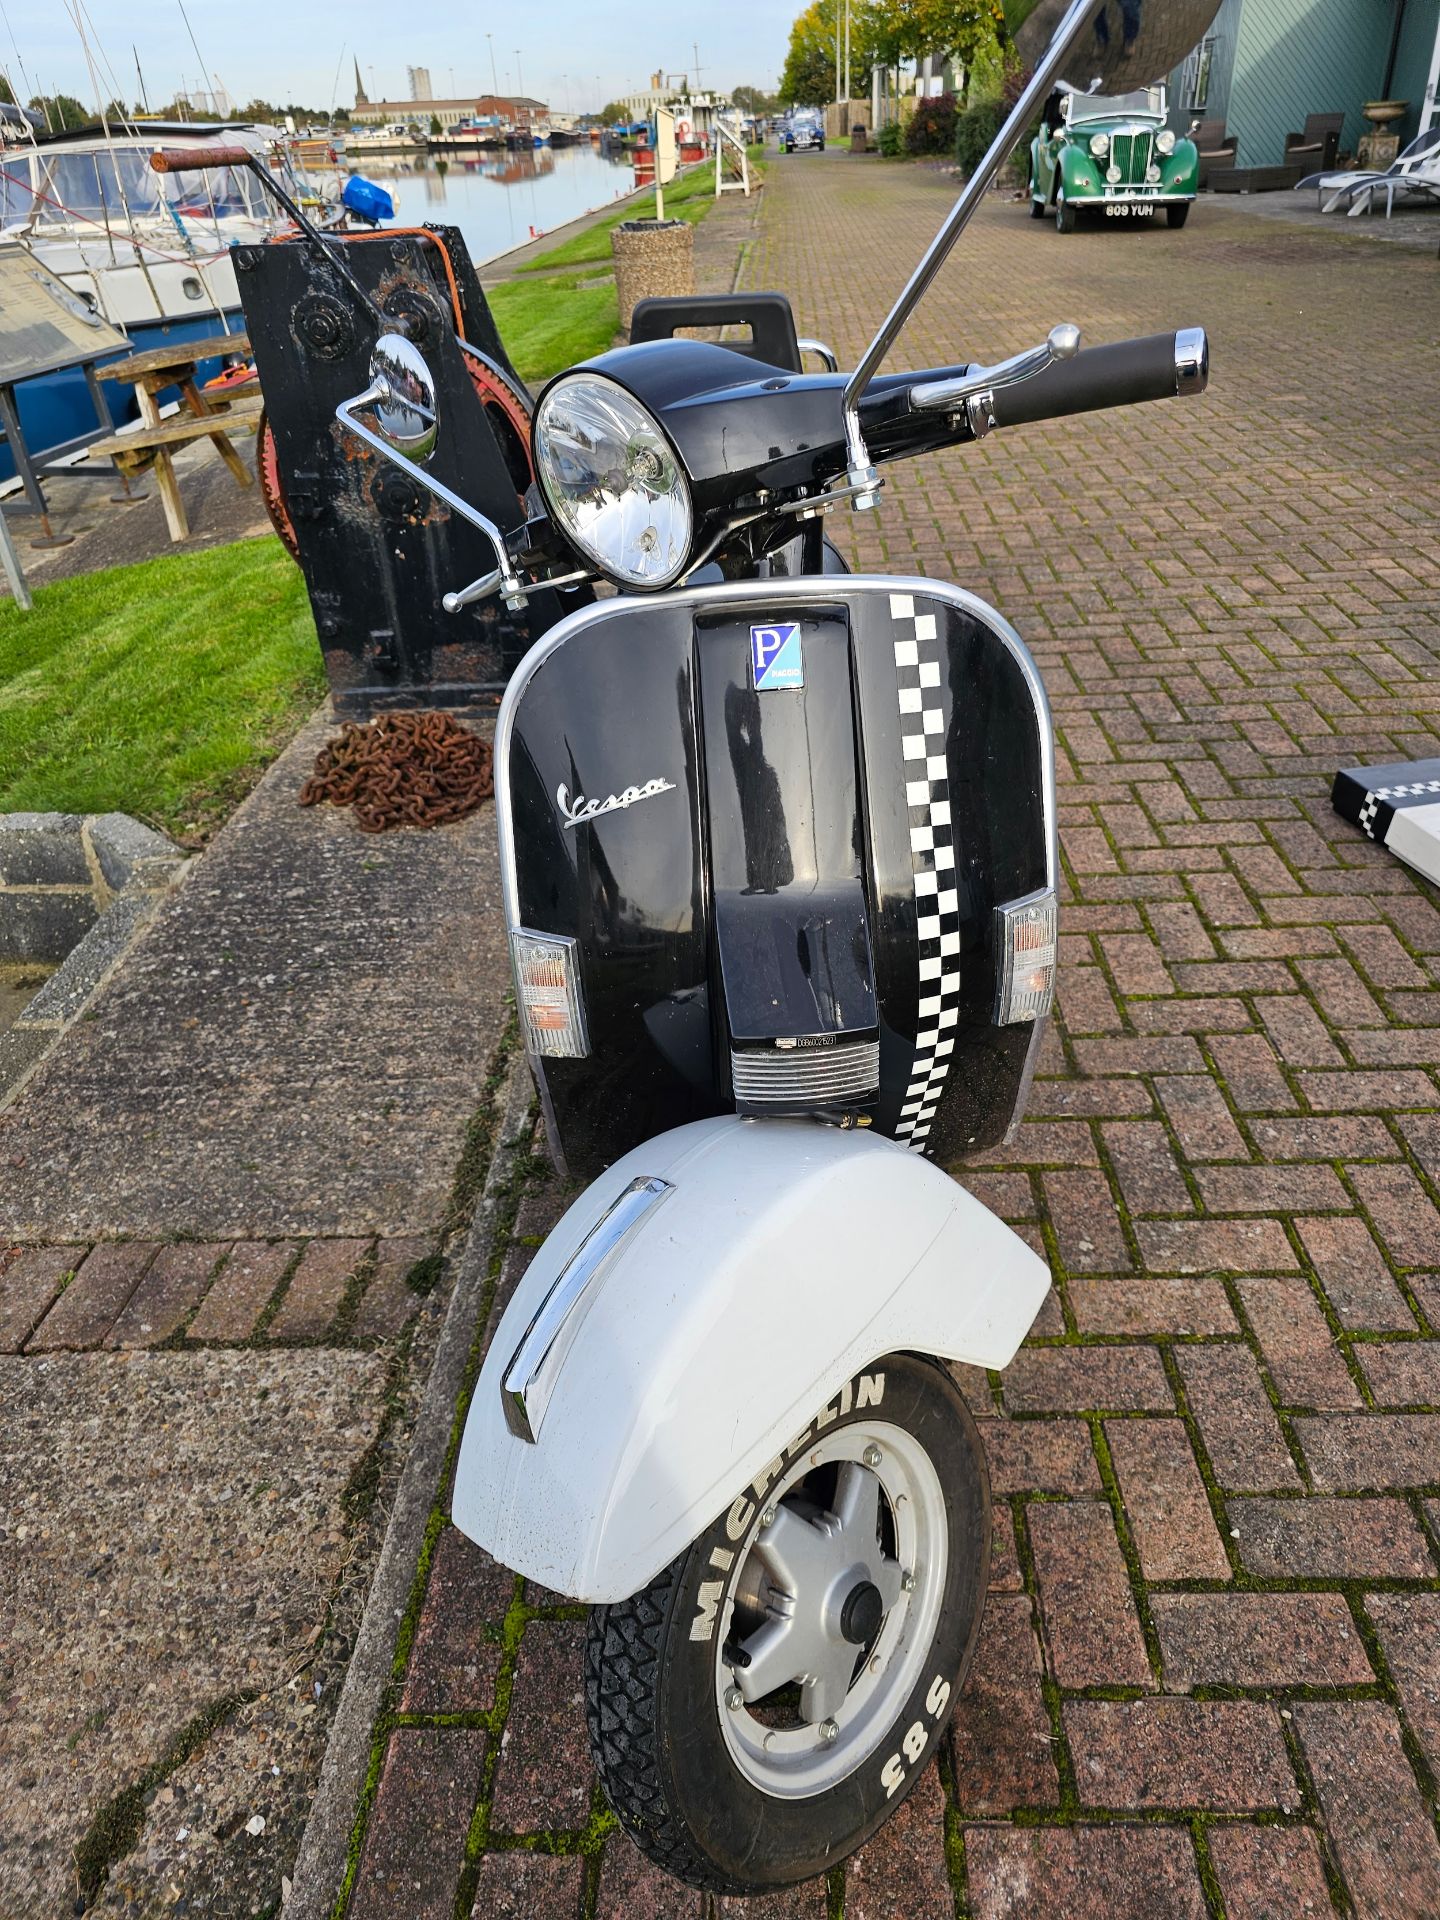 2003 Piaggio Vespa PX200 Serie Speciale Limited Edition 102/400, 198cc. Registration number P200 - Image 3 of 9